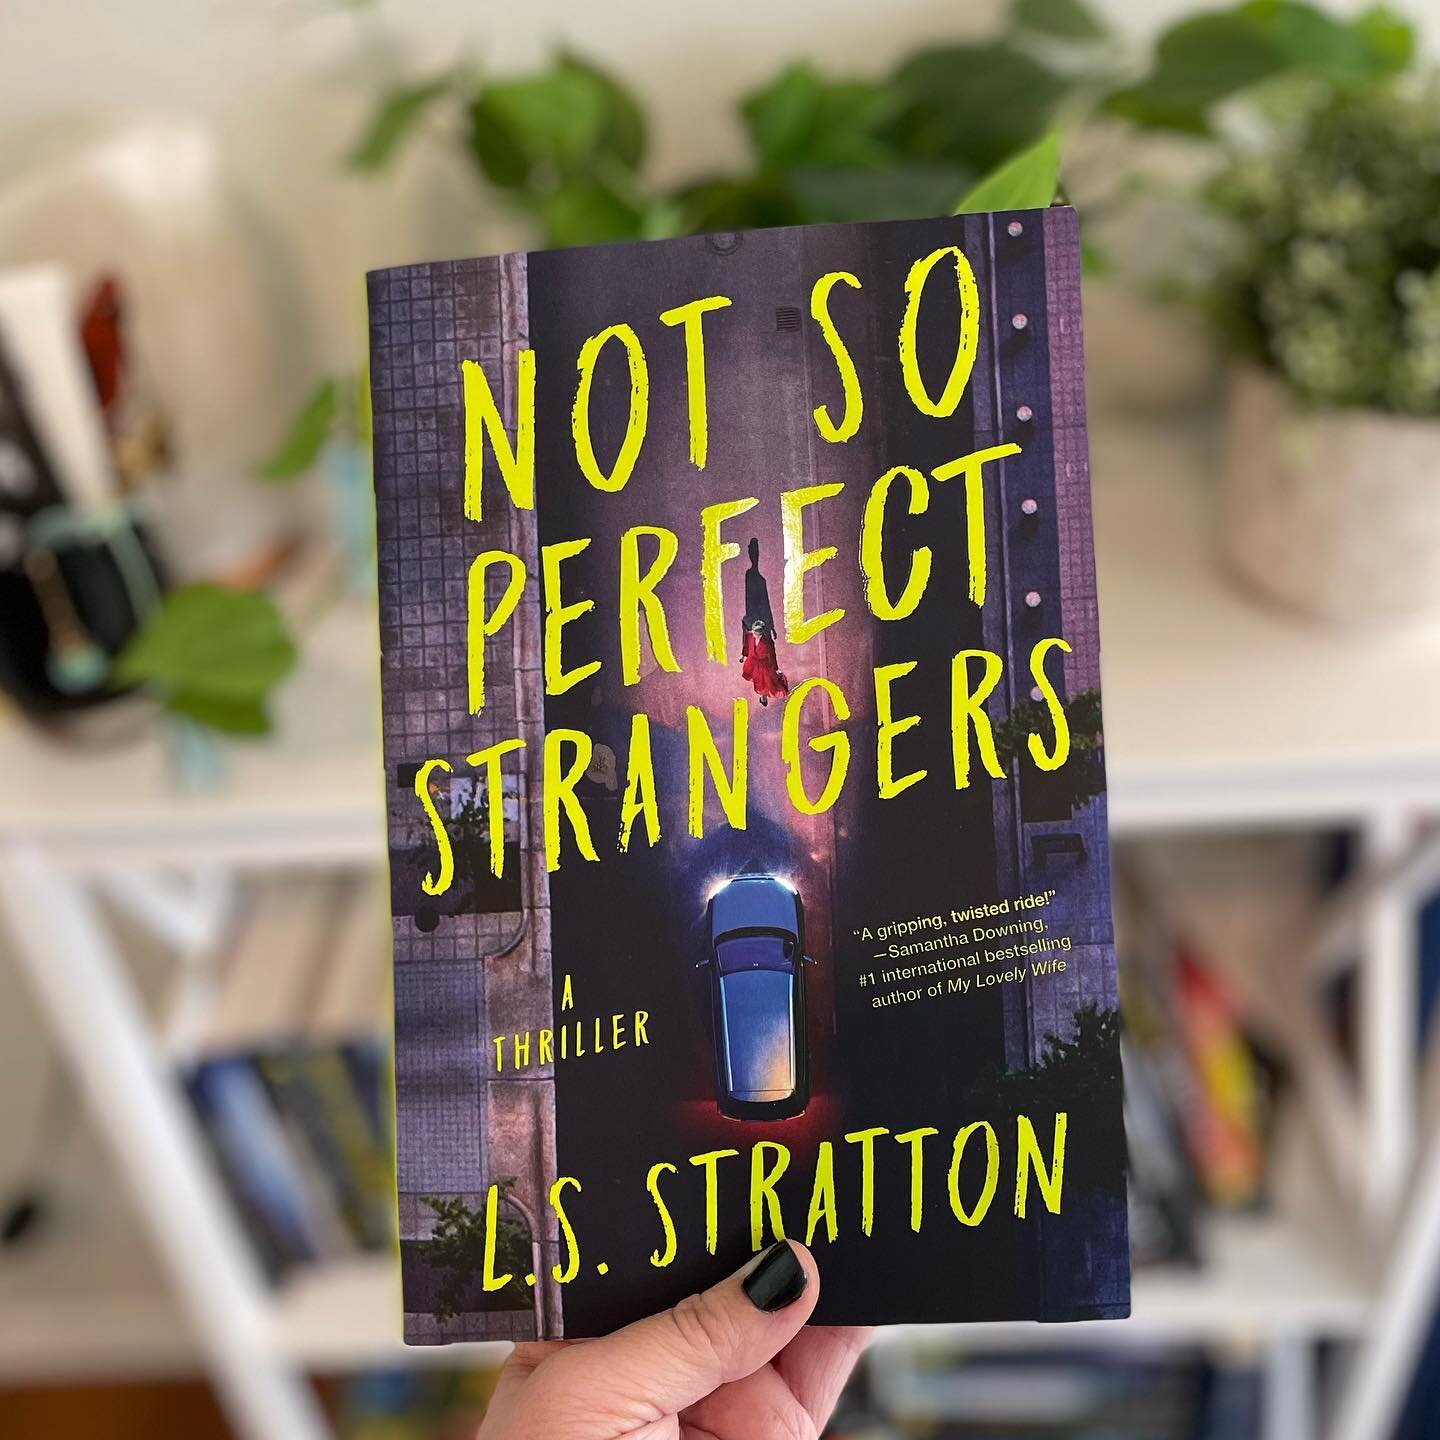 Latest addition to the collection!

📖 NOT SO PERFECT STRANGERS by @shellystrattonbooks 

🕵🏻 Tasha Jenkins has finally found the courage to leave her abusive husband. Taking her teenage son with her, Tasha checks into a hotel the night before their